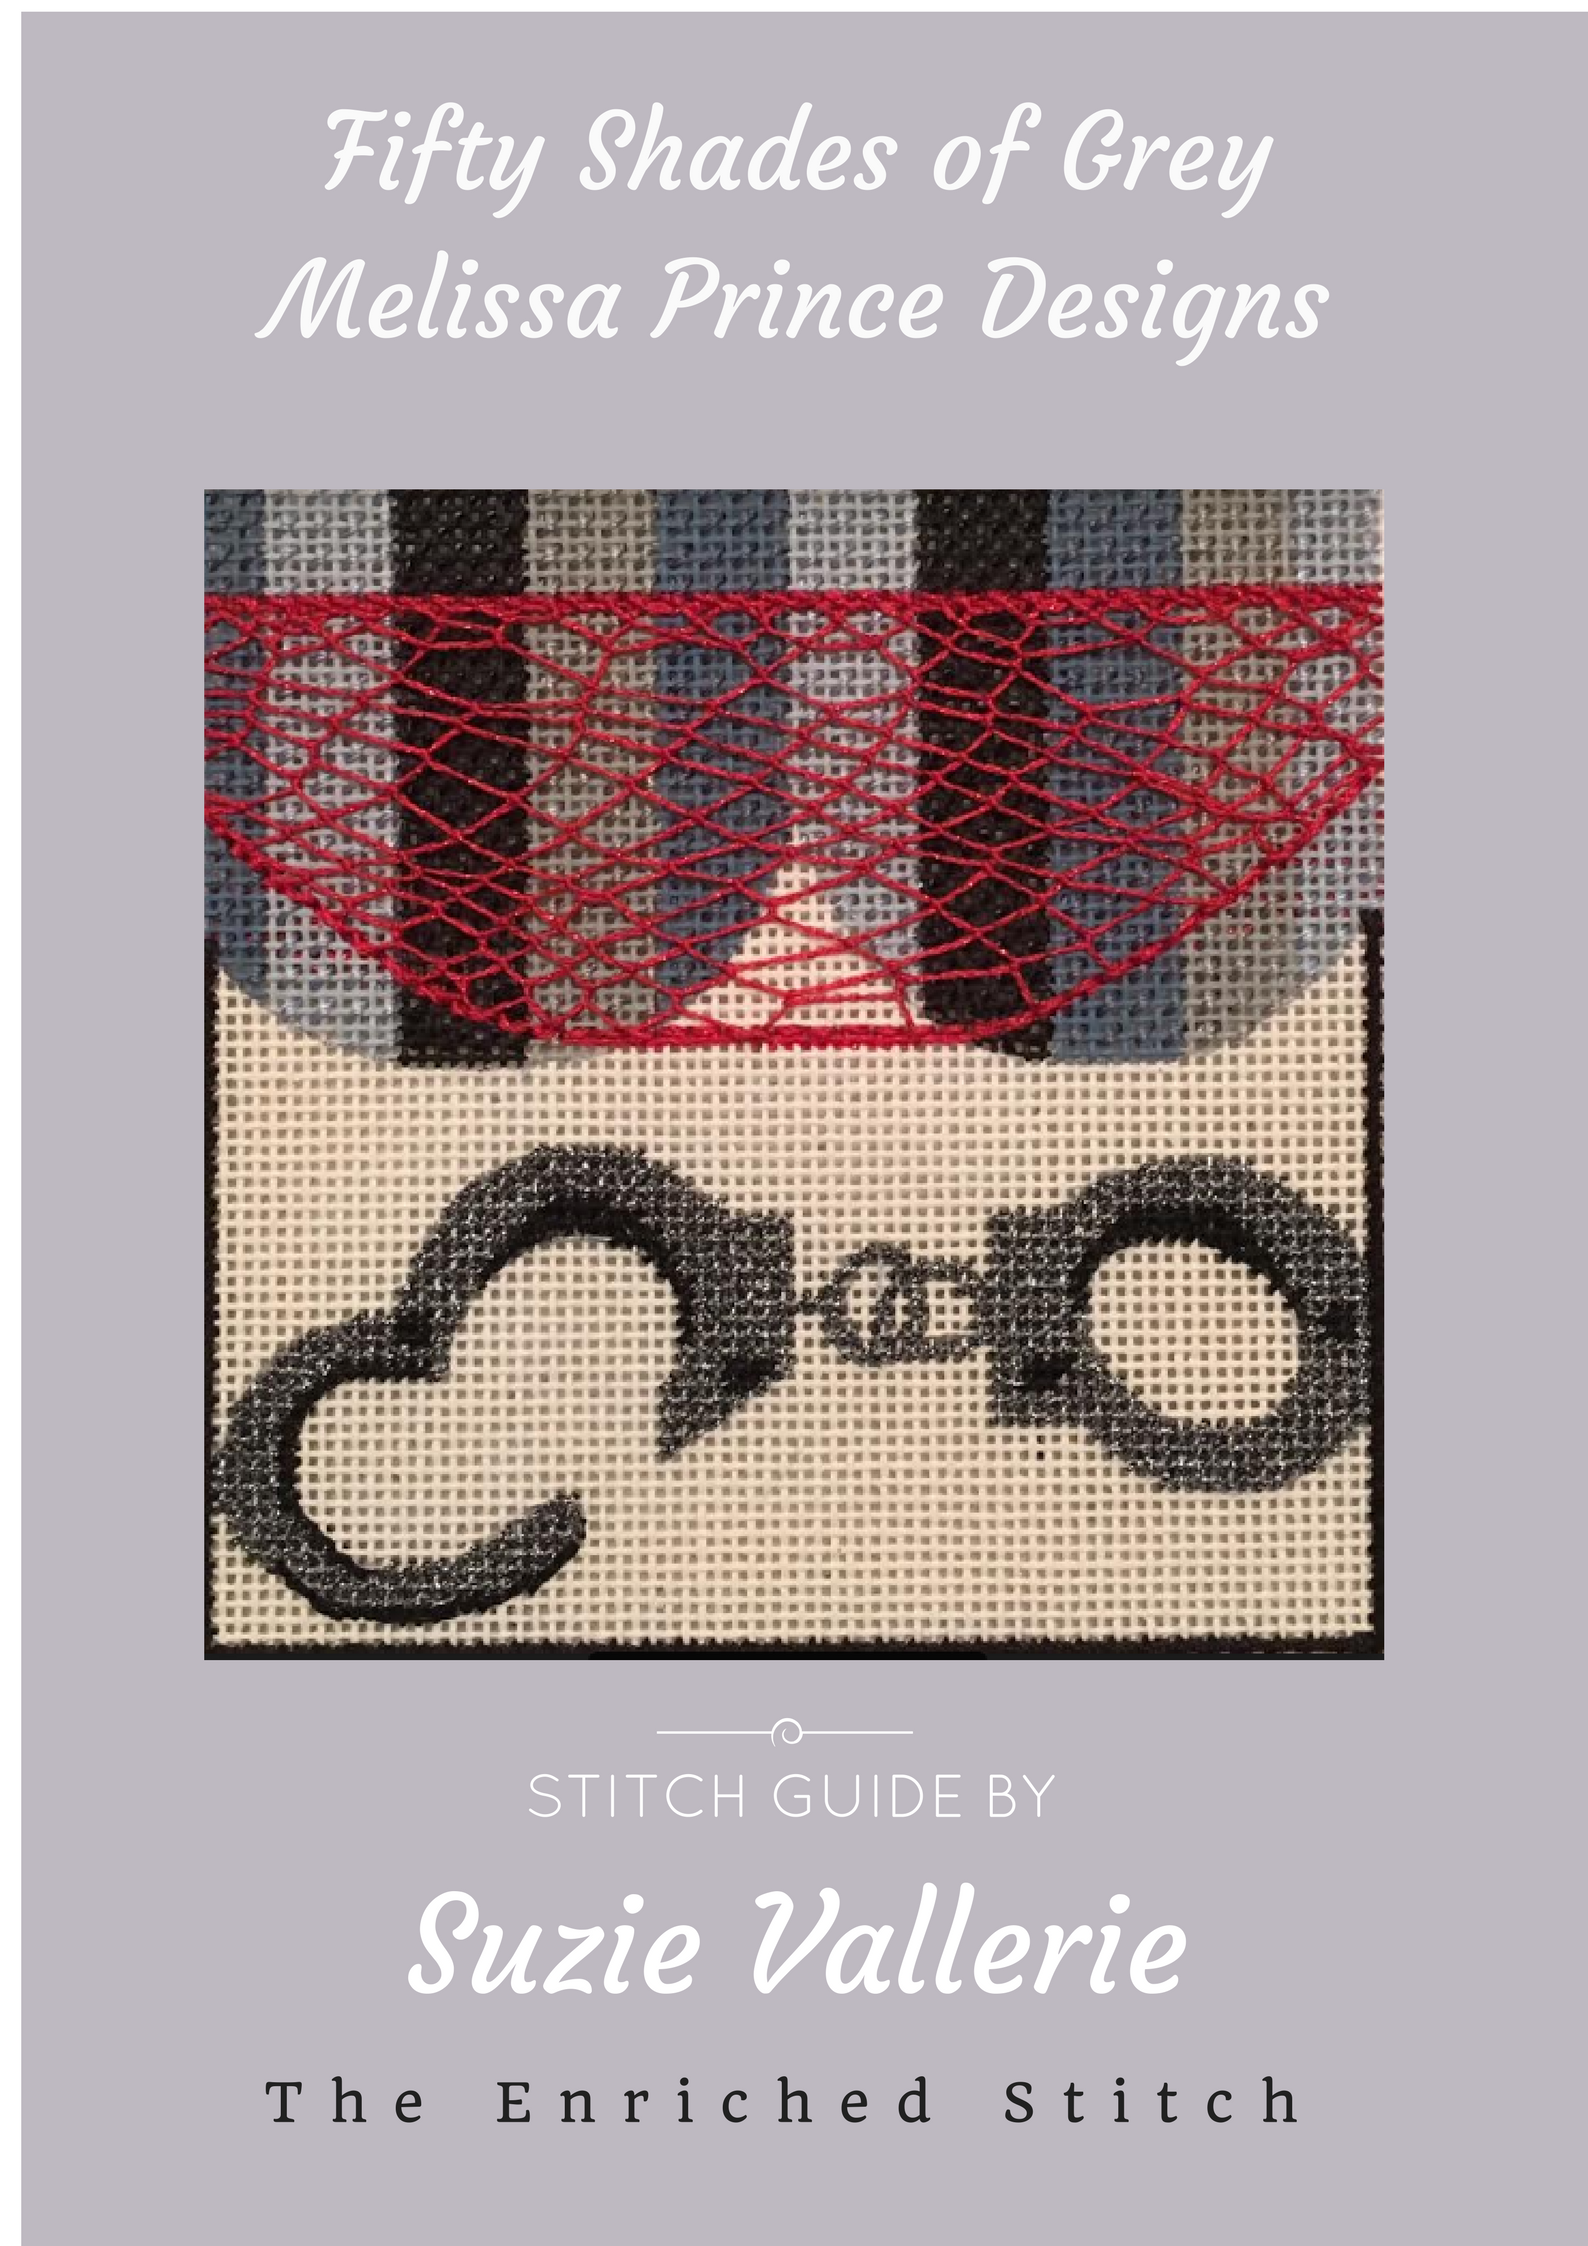 Beginner's Guide to Cross Stitch with Waste Canvas ASN #3517 – Knit Wit  Kreations